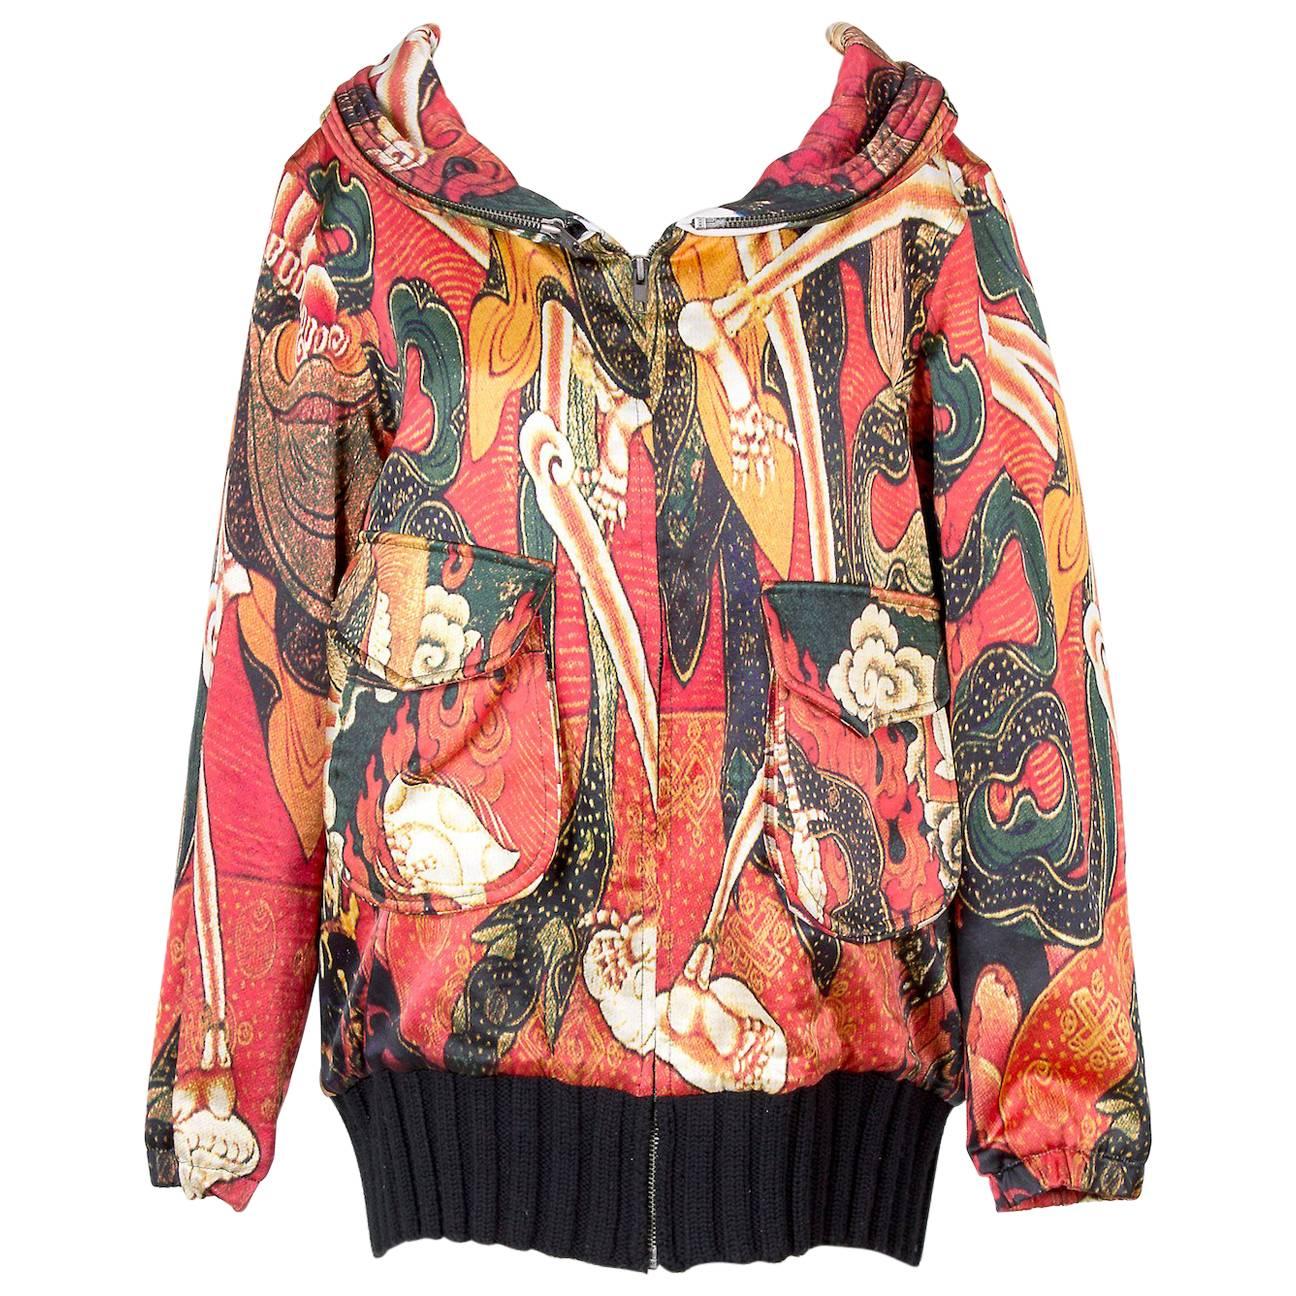 Vivienne Tam Relaxed Bomber Jacket with Skull Motif circa 1990s